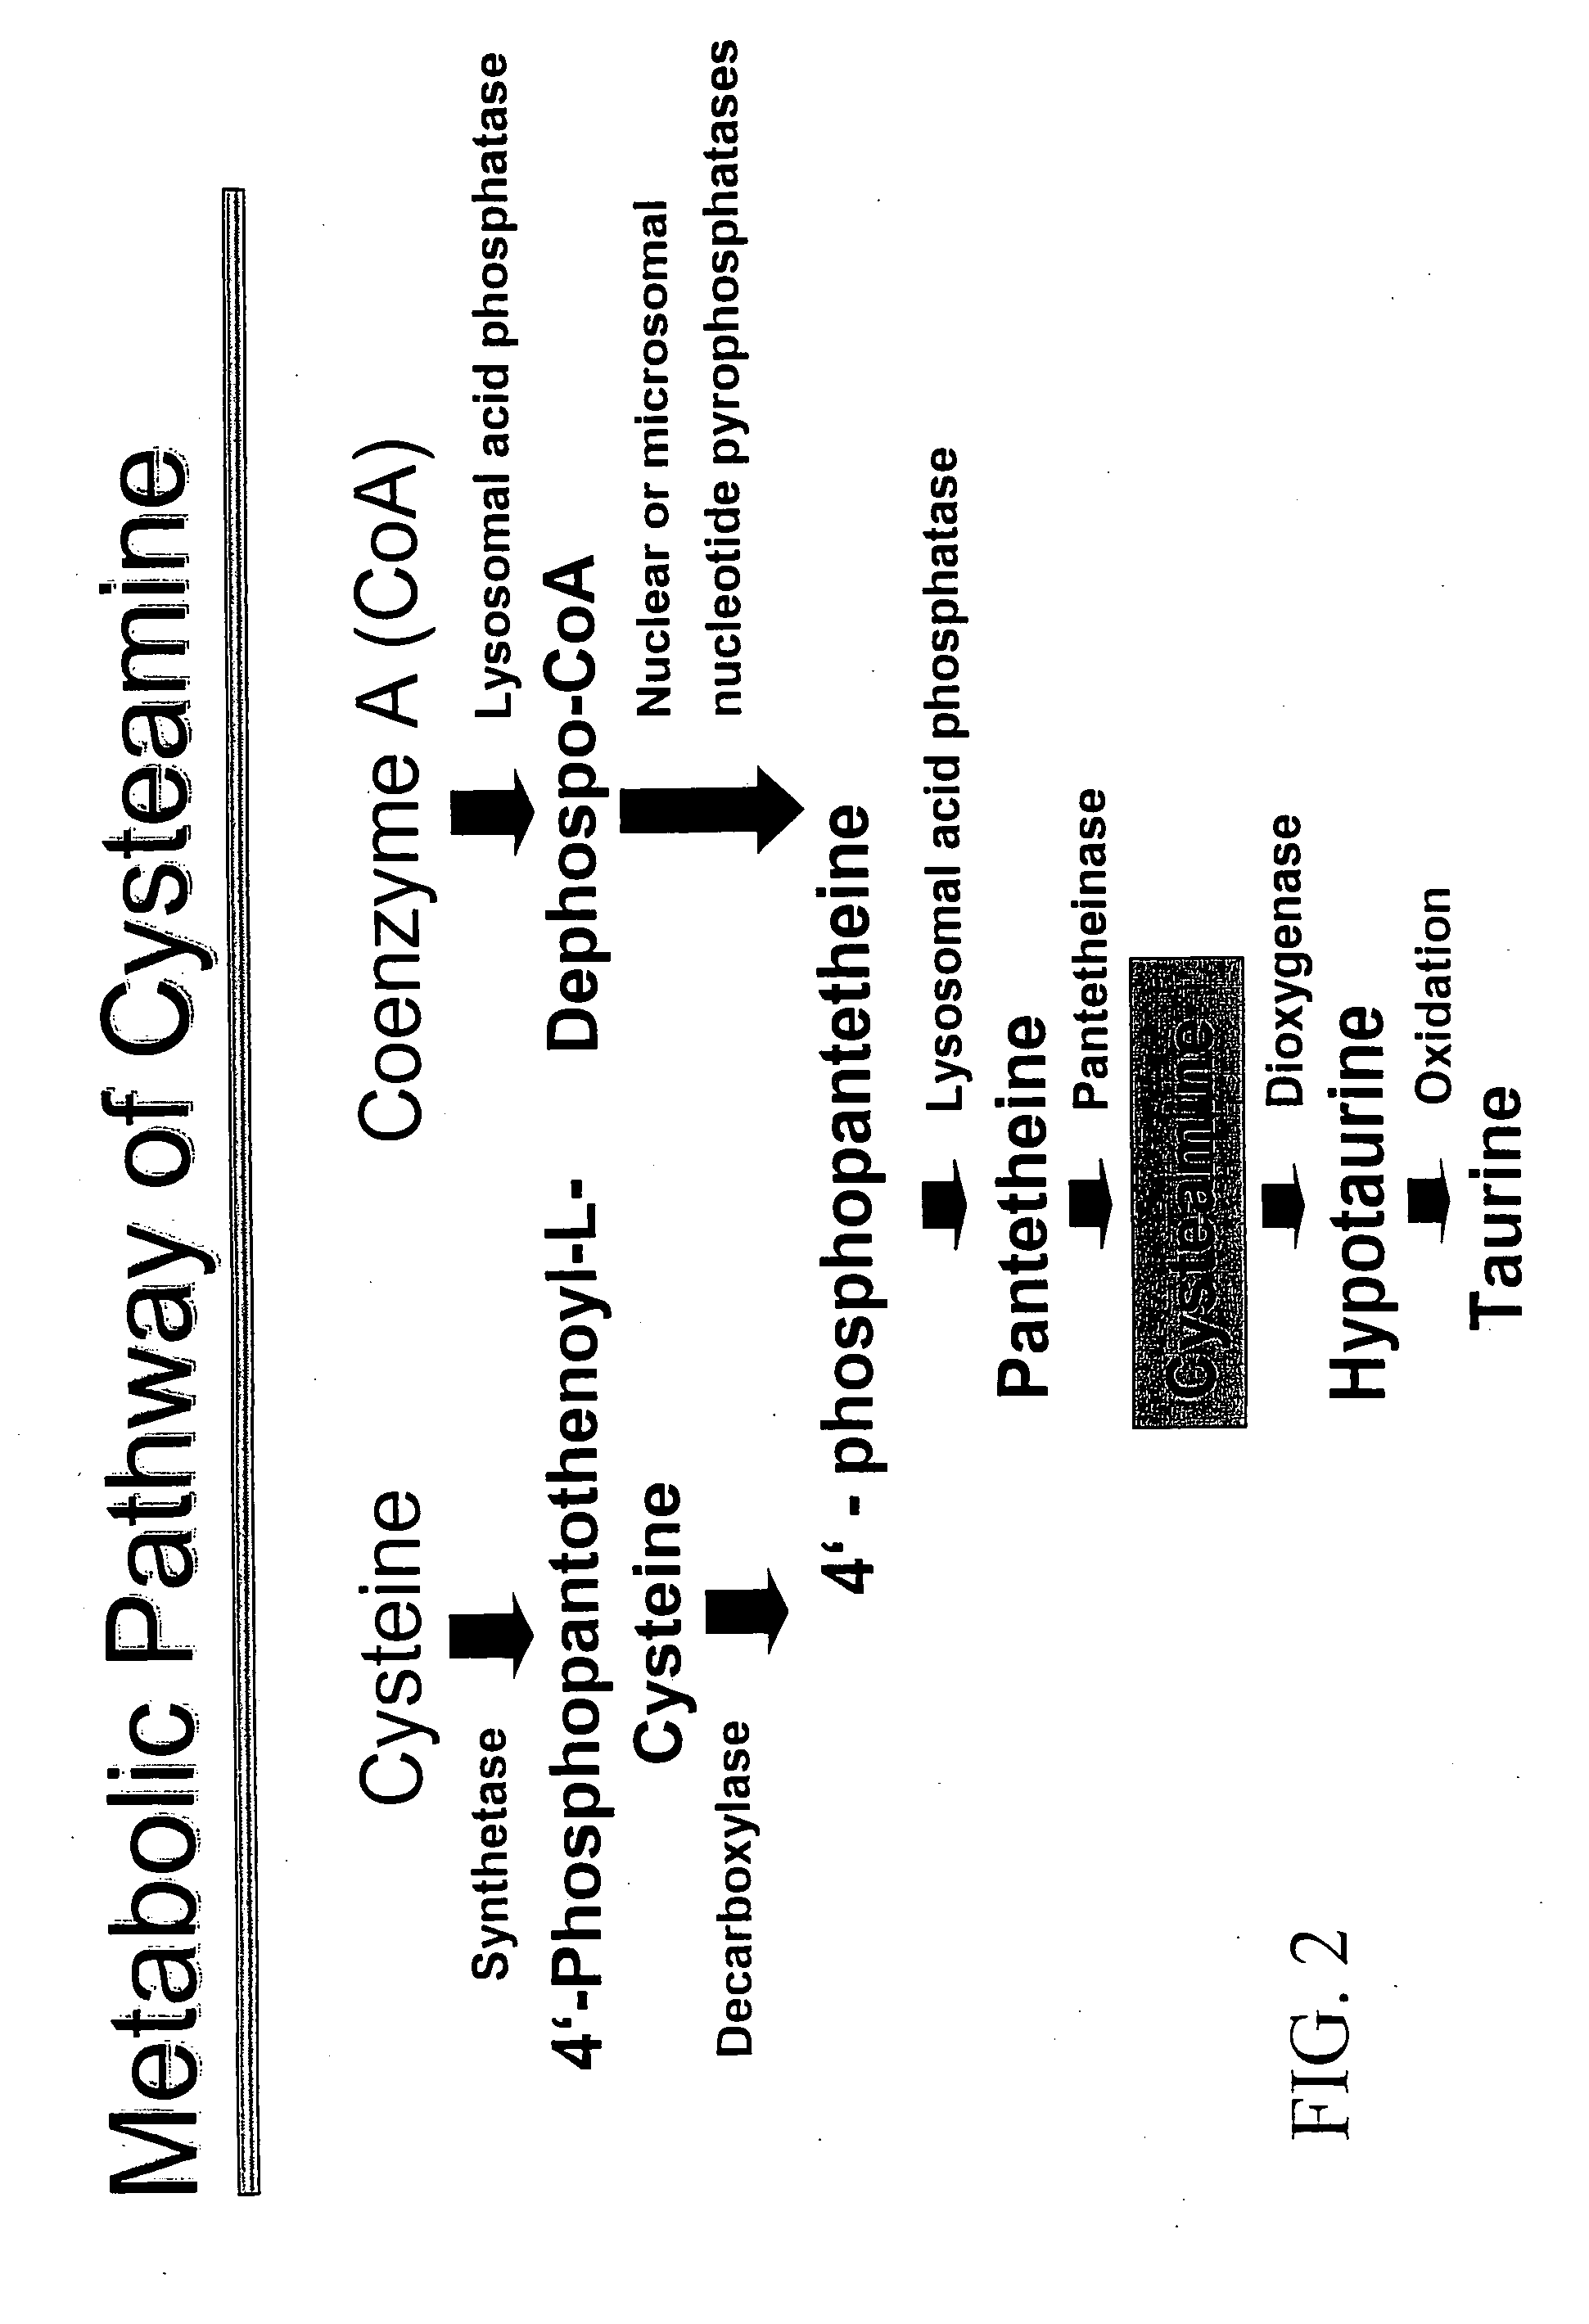 Materials and methods for treating viral infections